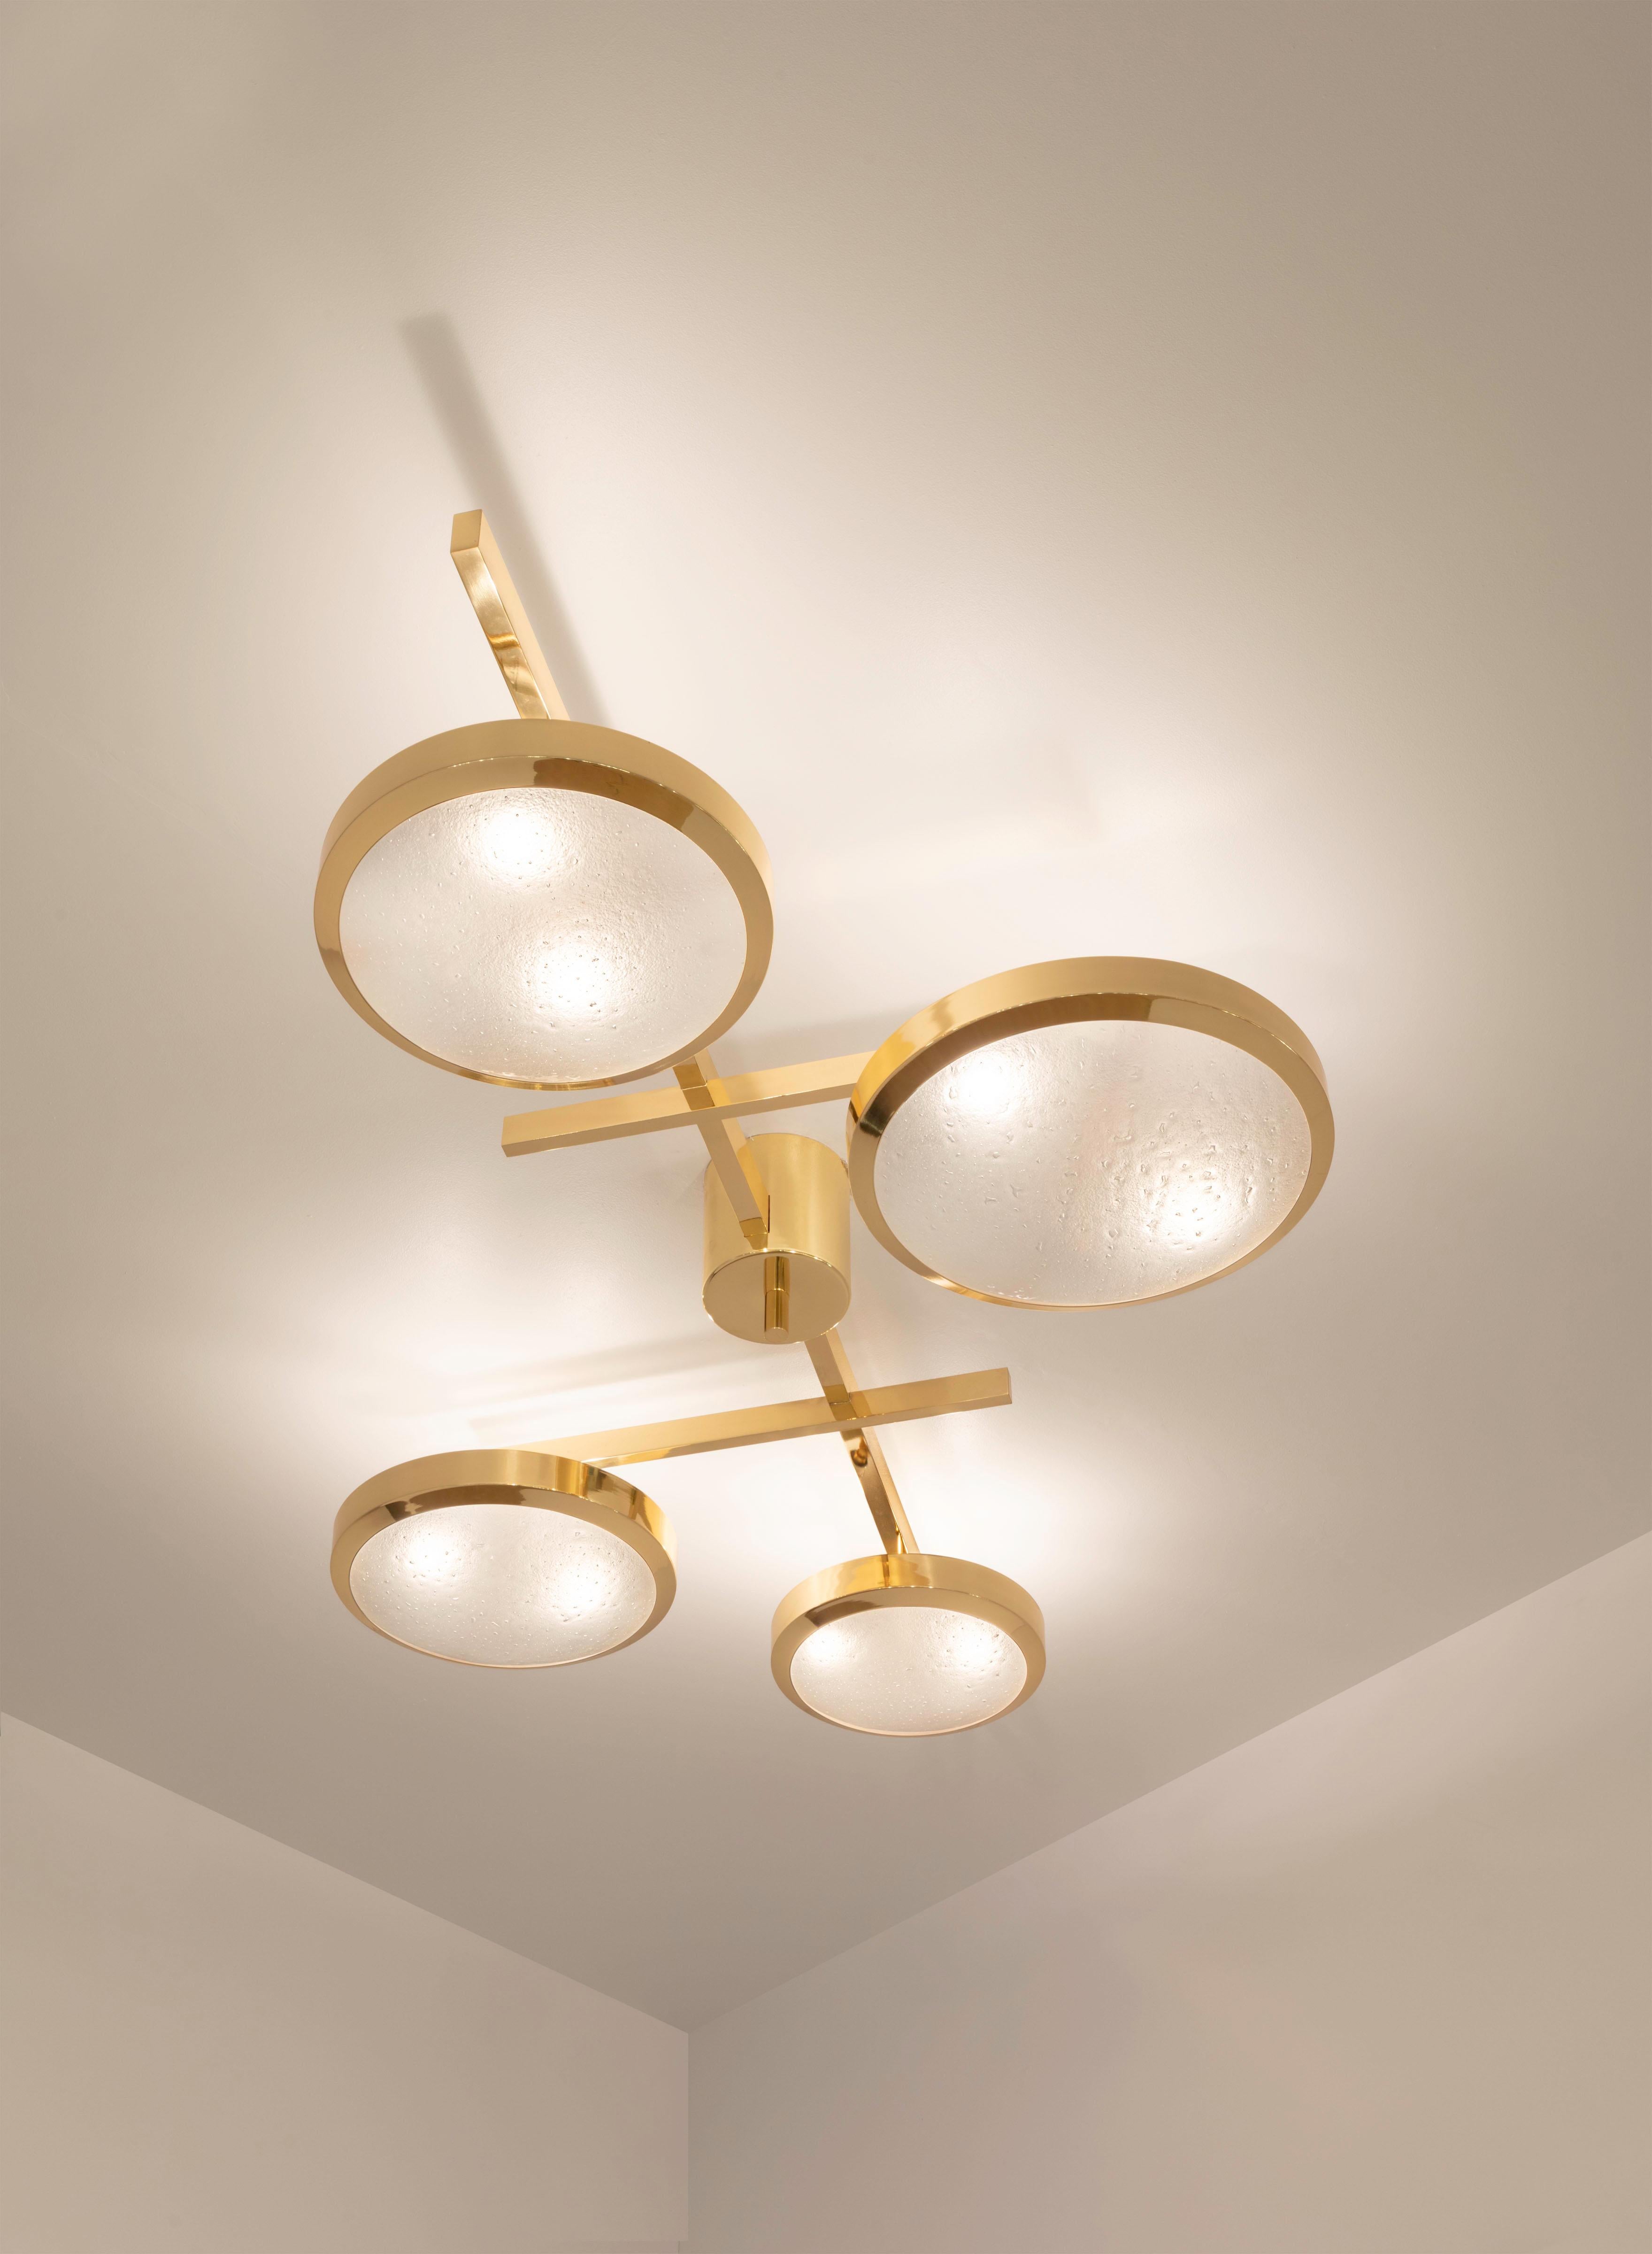 Tetrix Ceiling Light by Gaspare Asaro-Satin Brass Finish For Sale 3